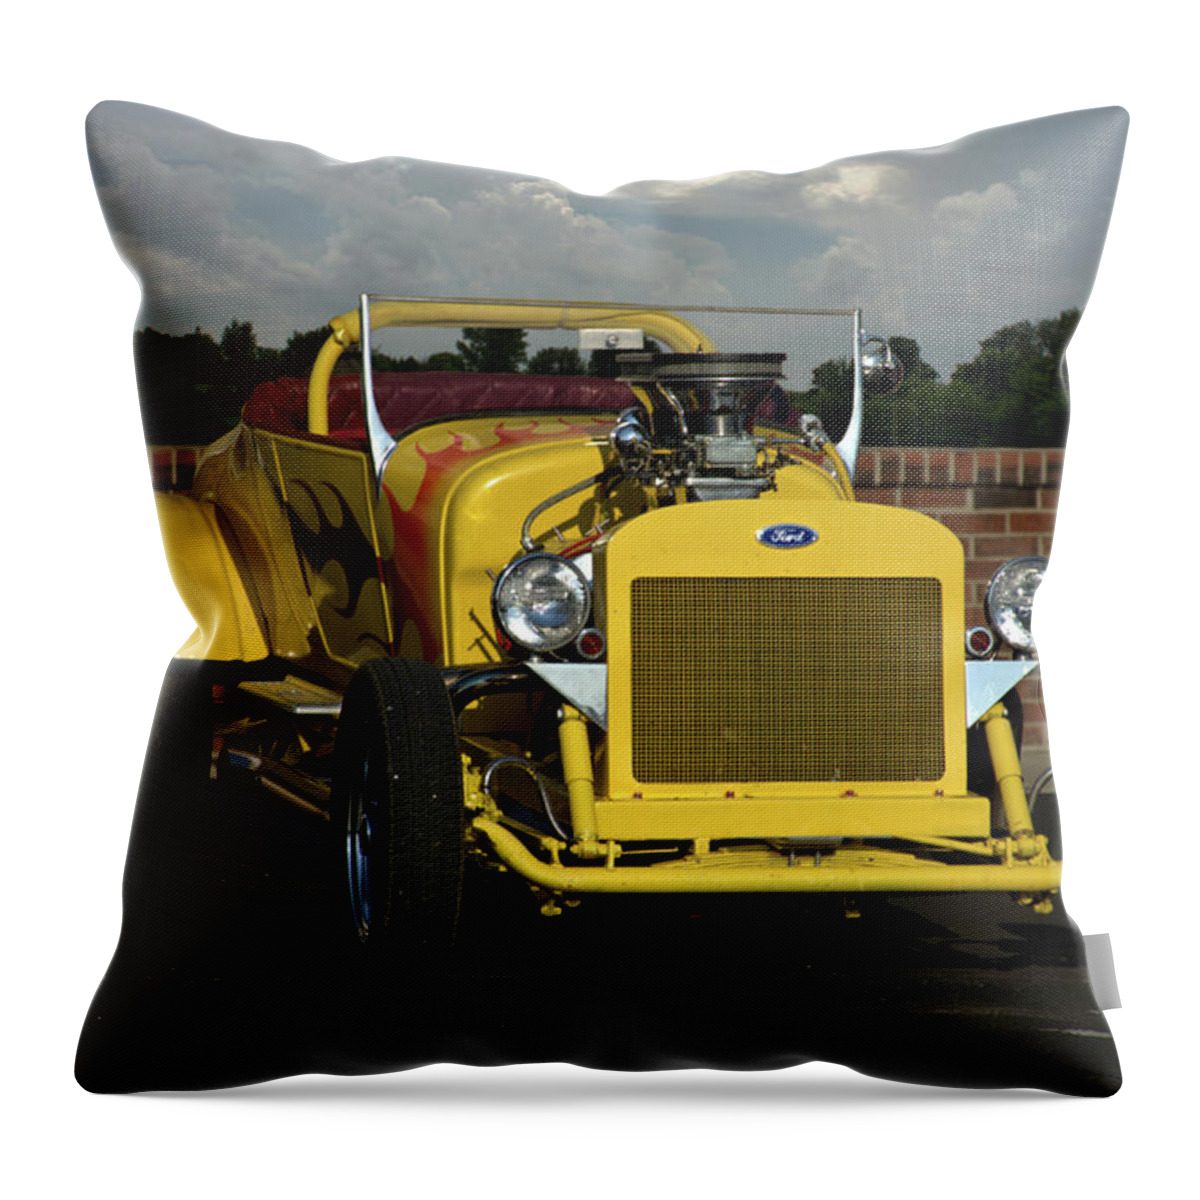 1928 Throw Pillow featuring the photograph 1928 Ford Bucket T Hot Rod by Tim McCullough